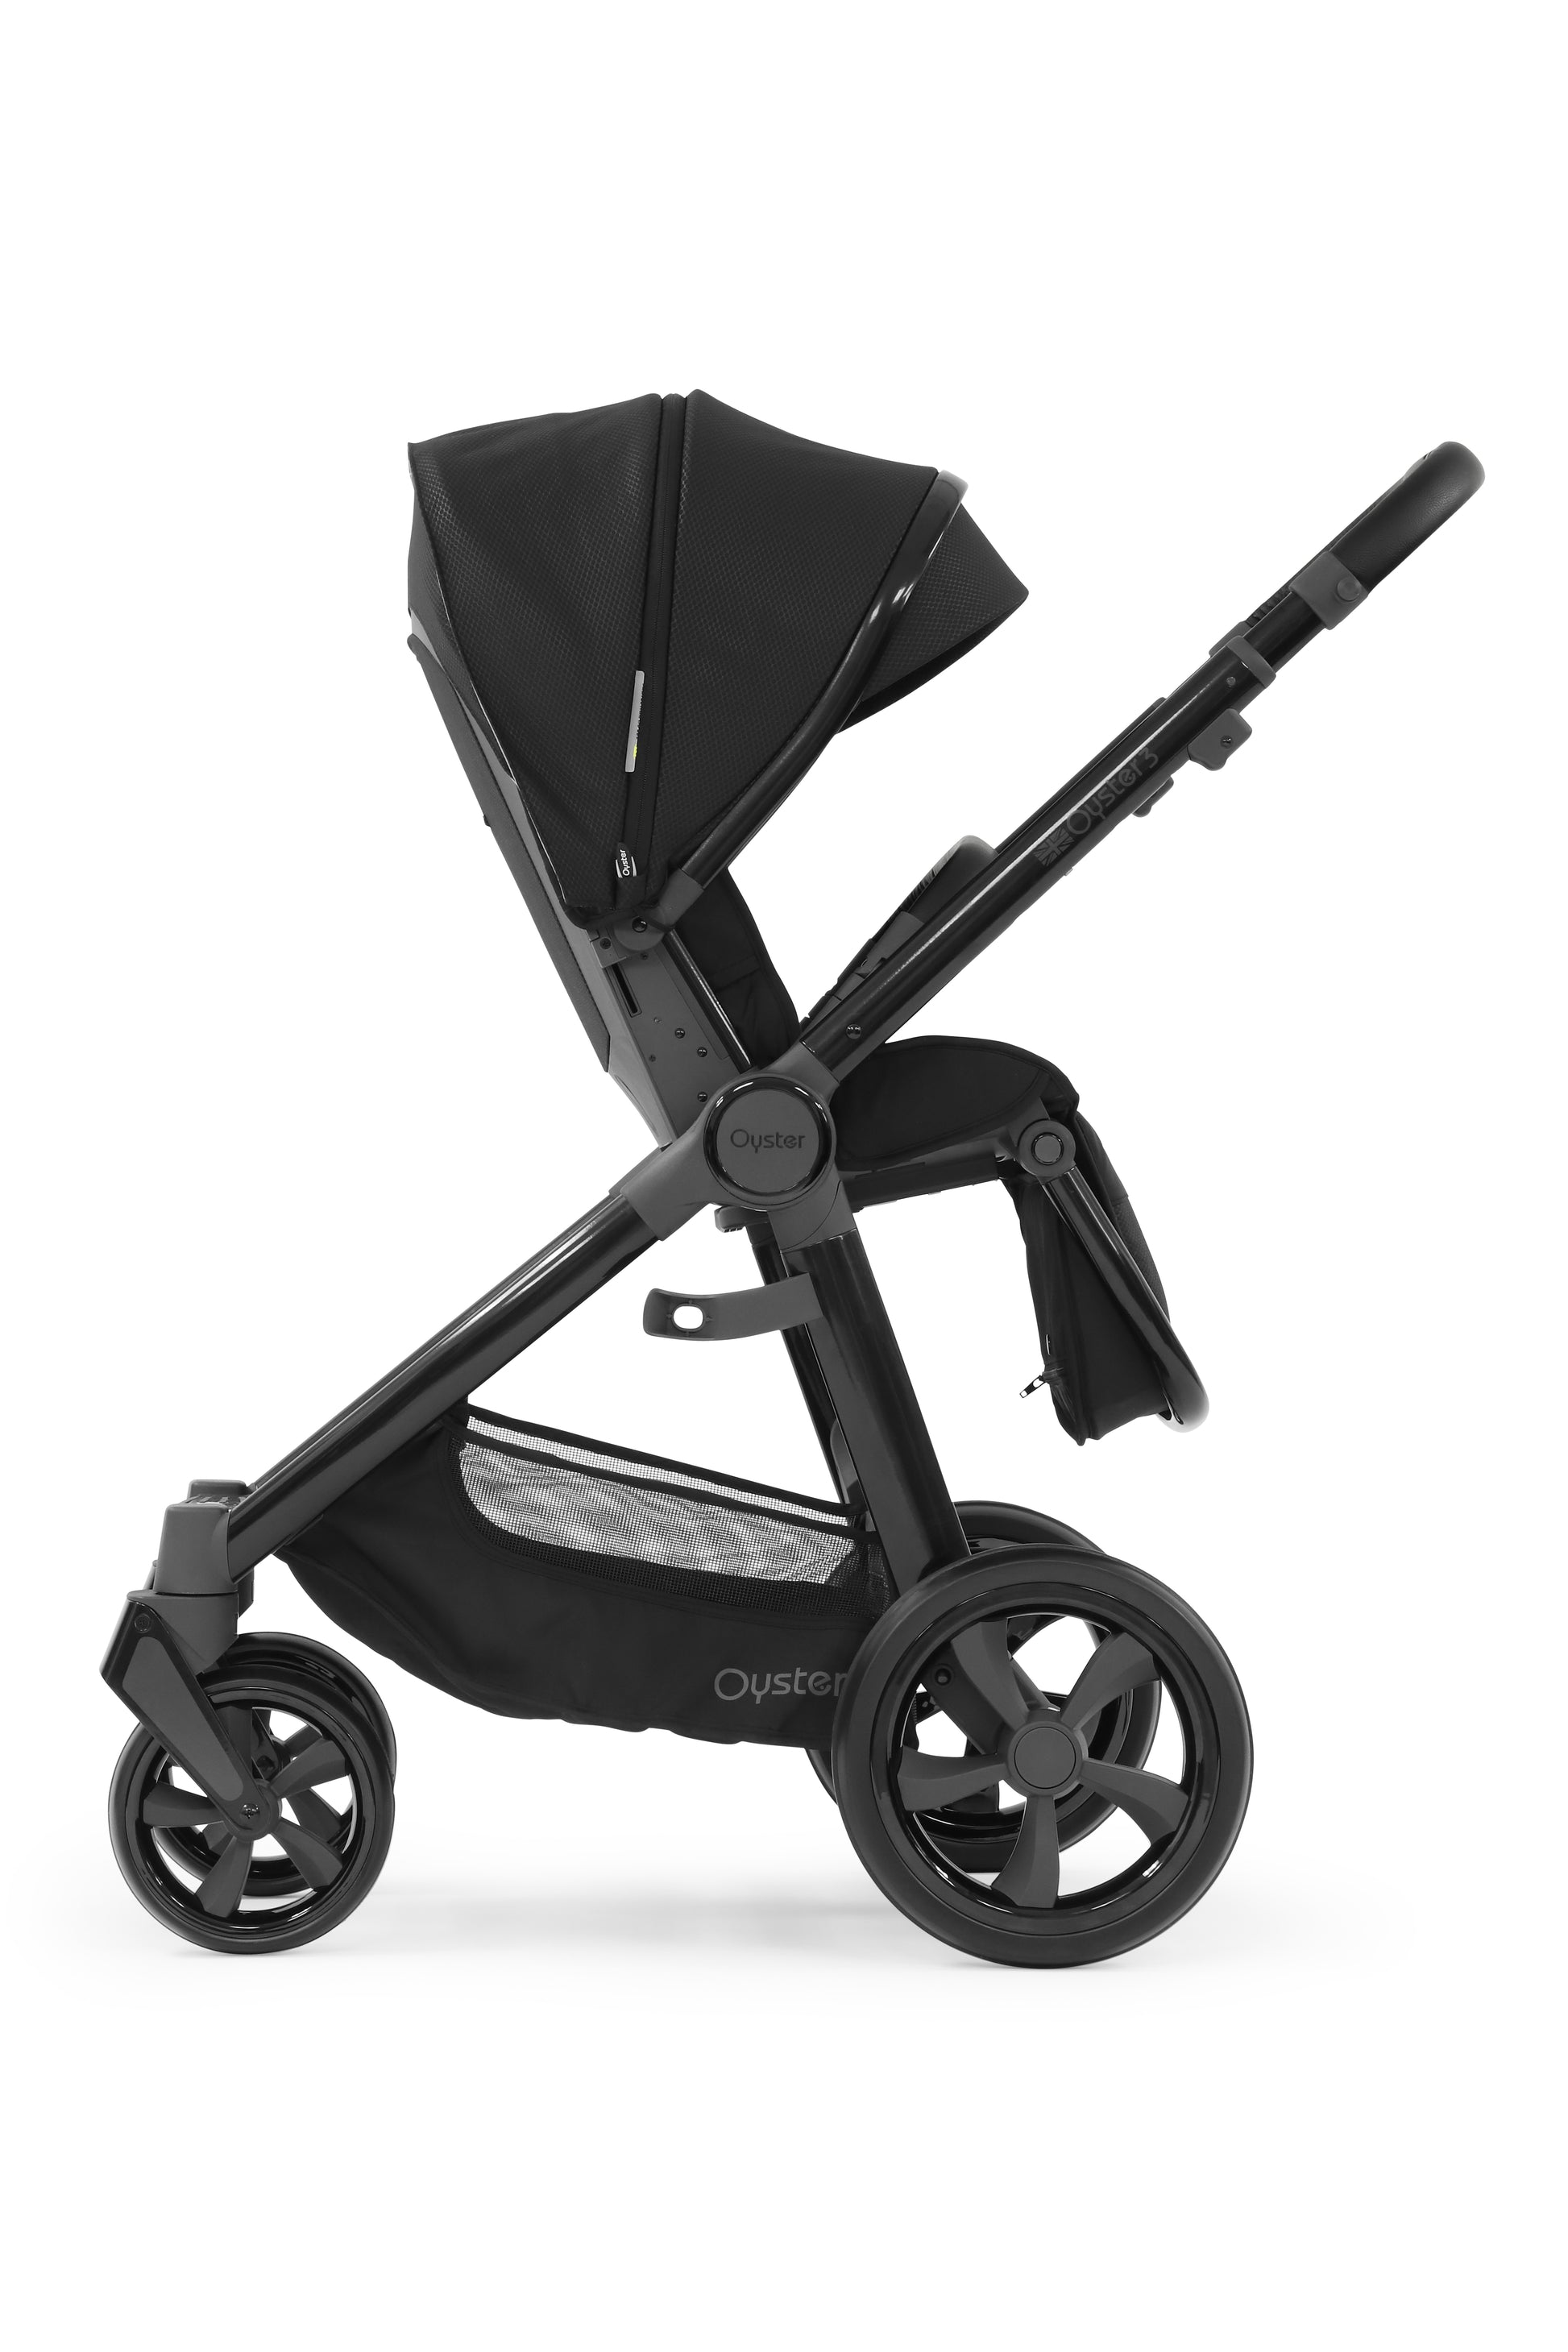 Oyster 3 Essential 5 Piece Maxi Cosi Pebble 360 Pro i-Size Travel System| Pixel (Gloss Black Frame)